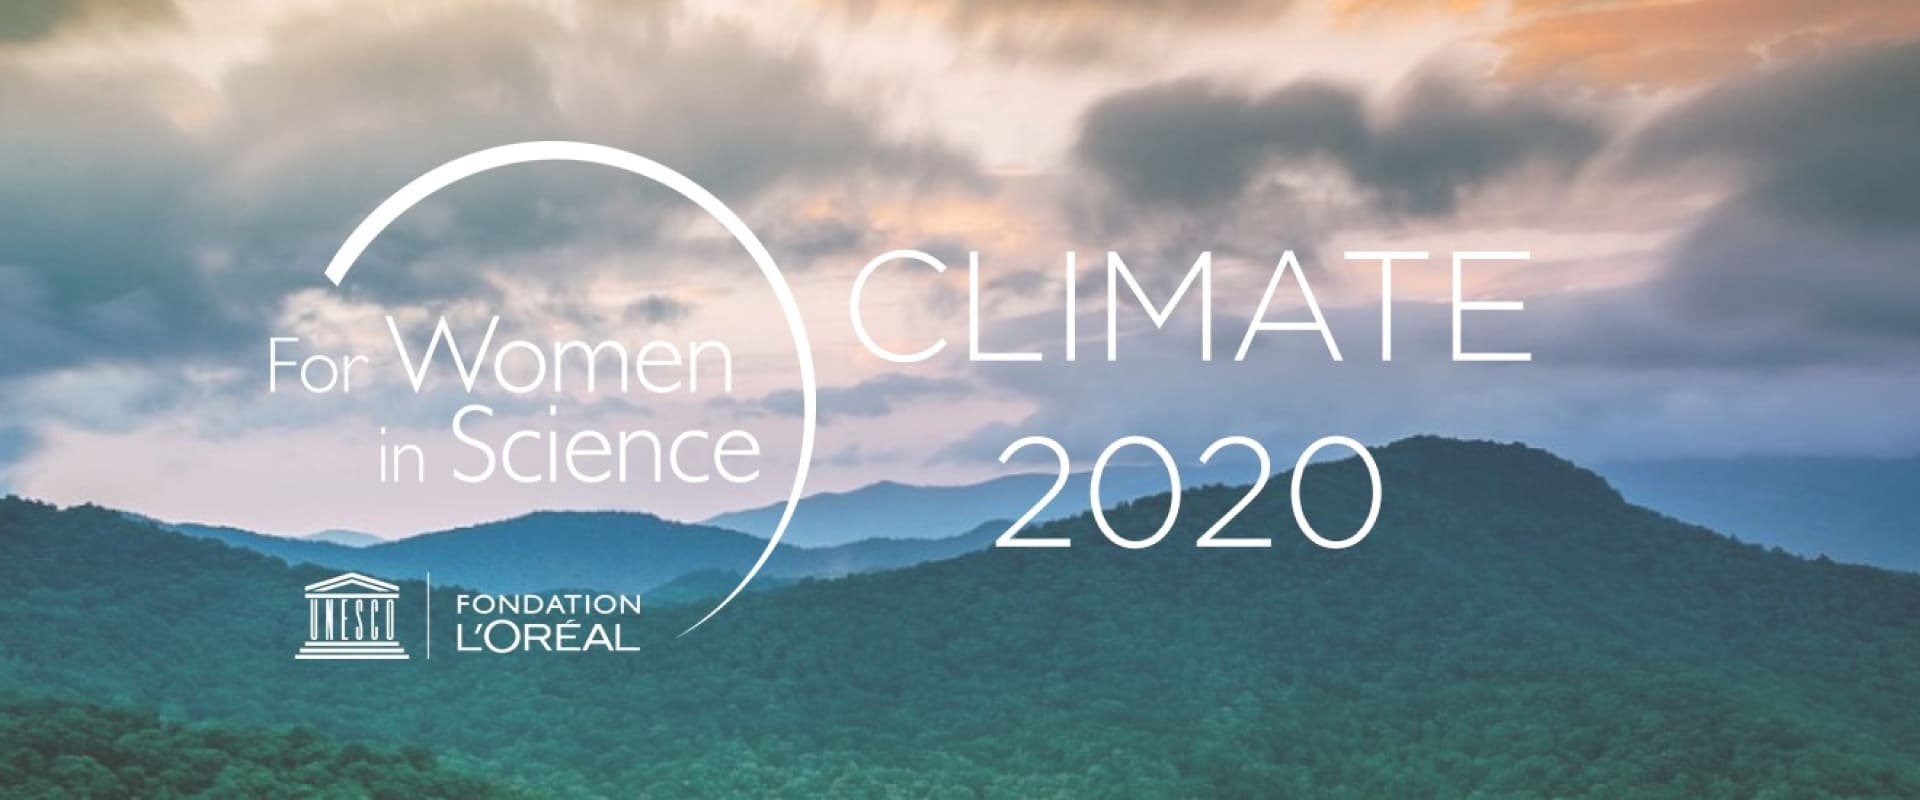 L'Oréal-UNESCO for Women in Science Fellowships – 2020 Climate Edition